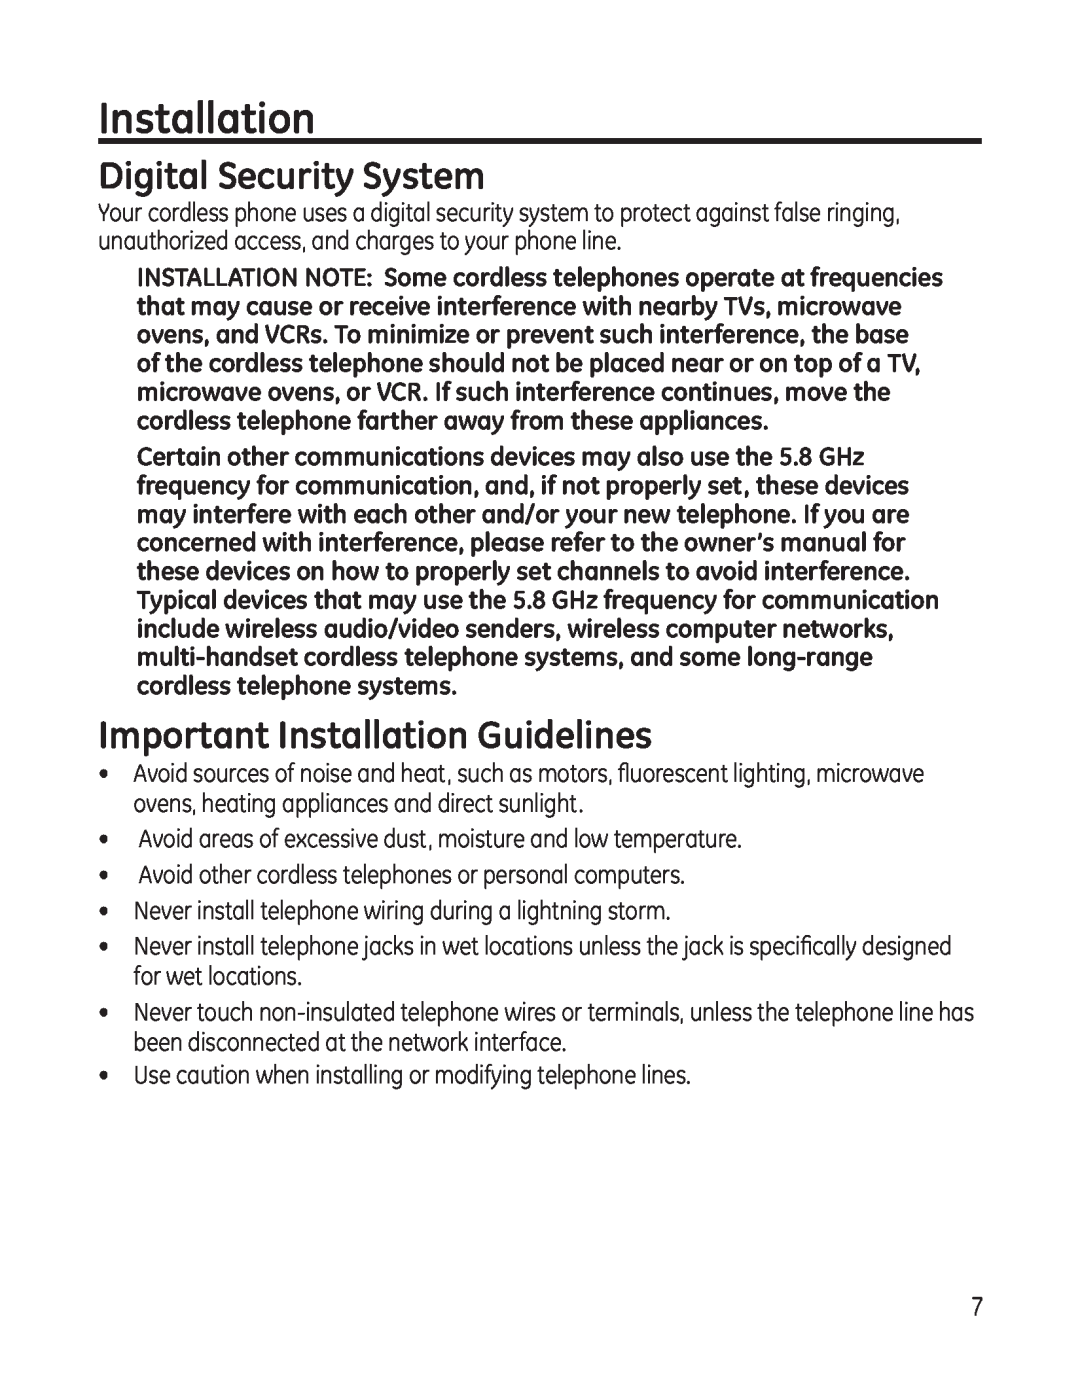 GE 25865 manual Digital Security System, Important Installation Guidelines 